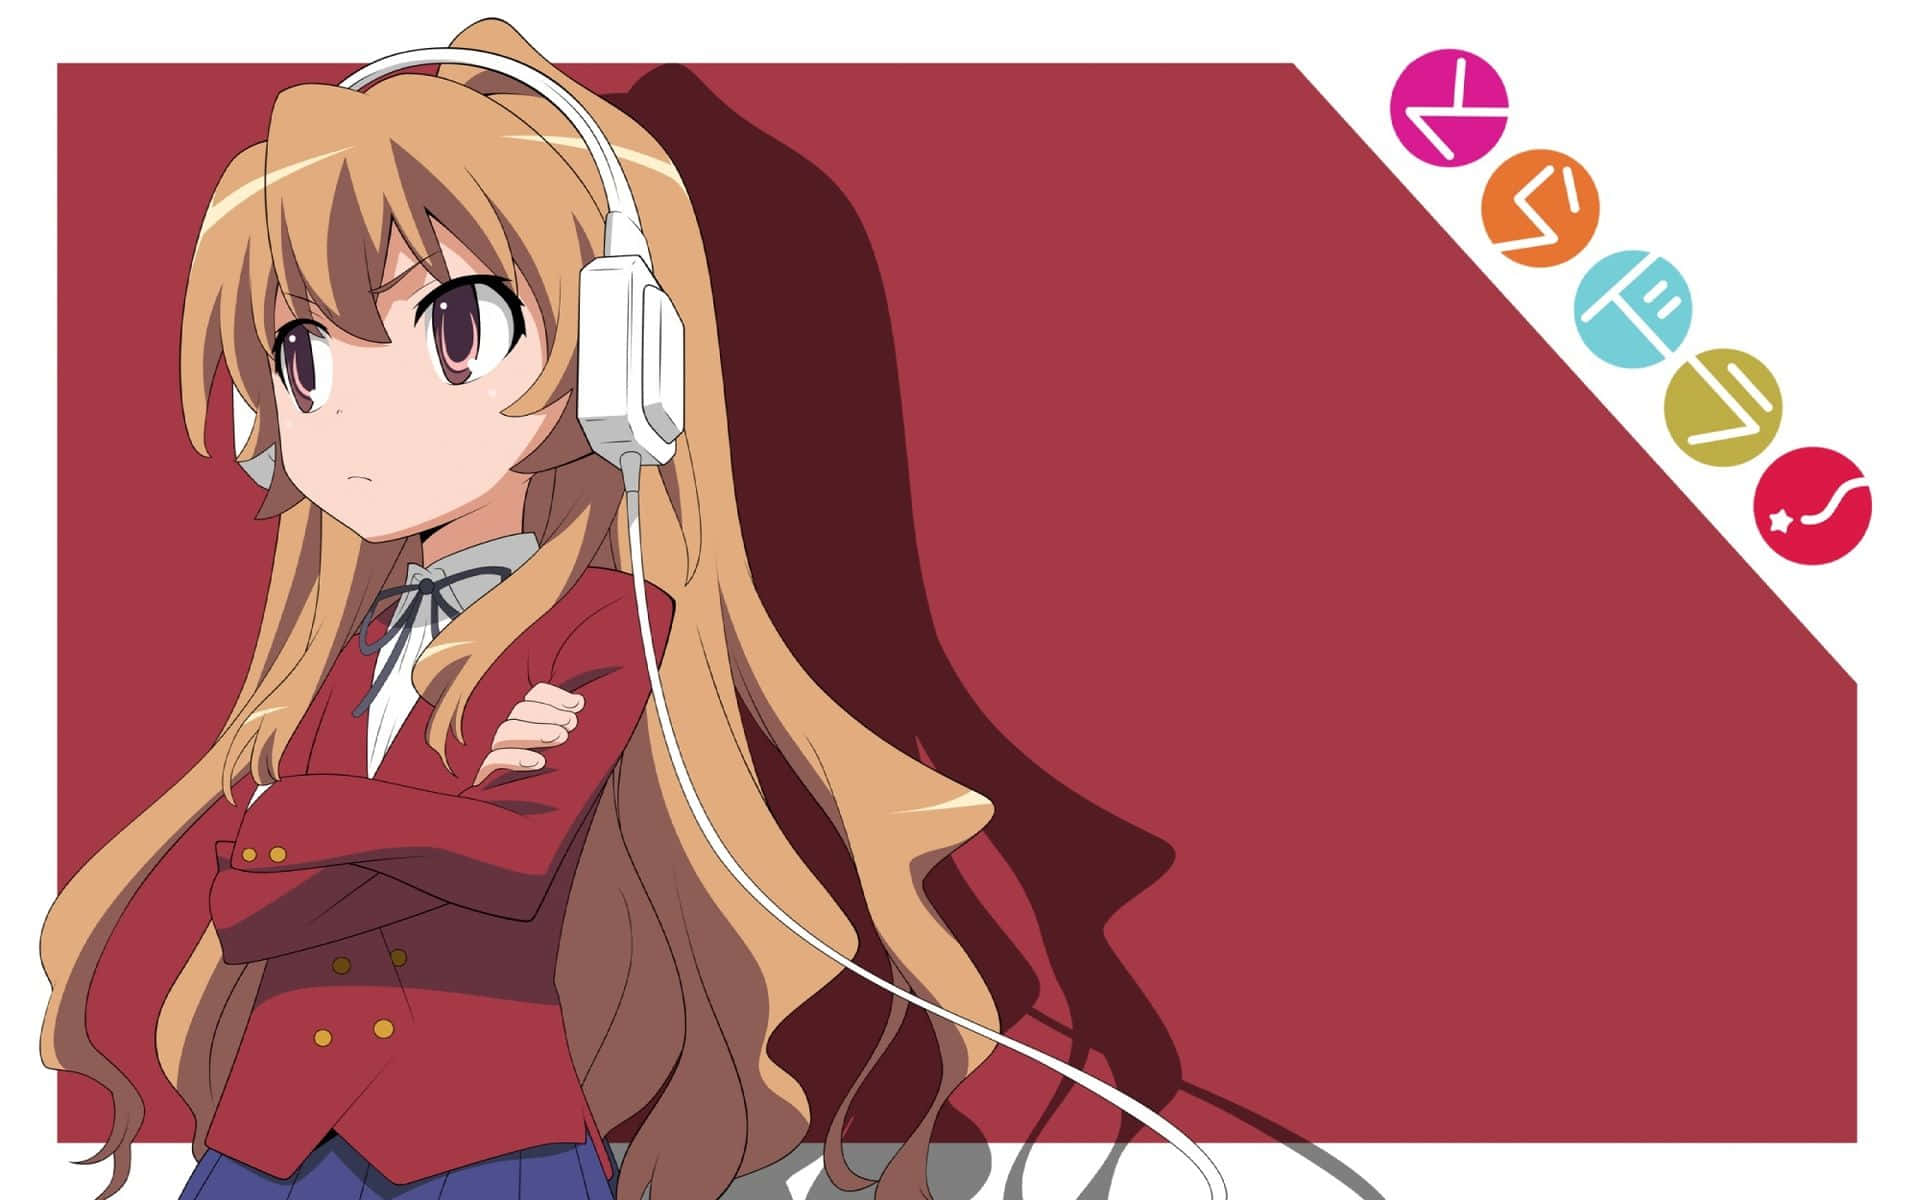 Taiga Aisaka, A Strong-willed High School Student From The Series Toradora! Background